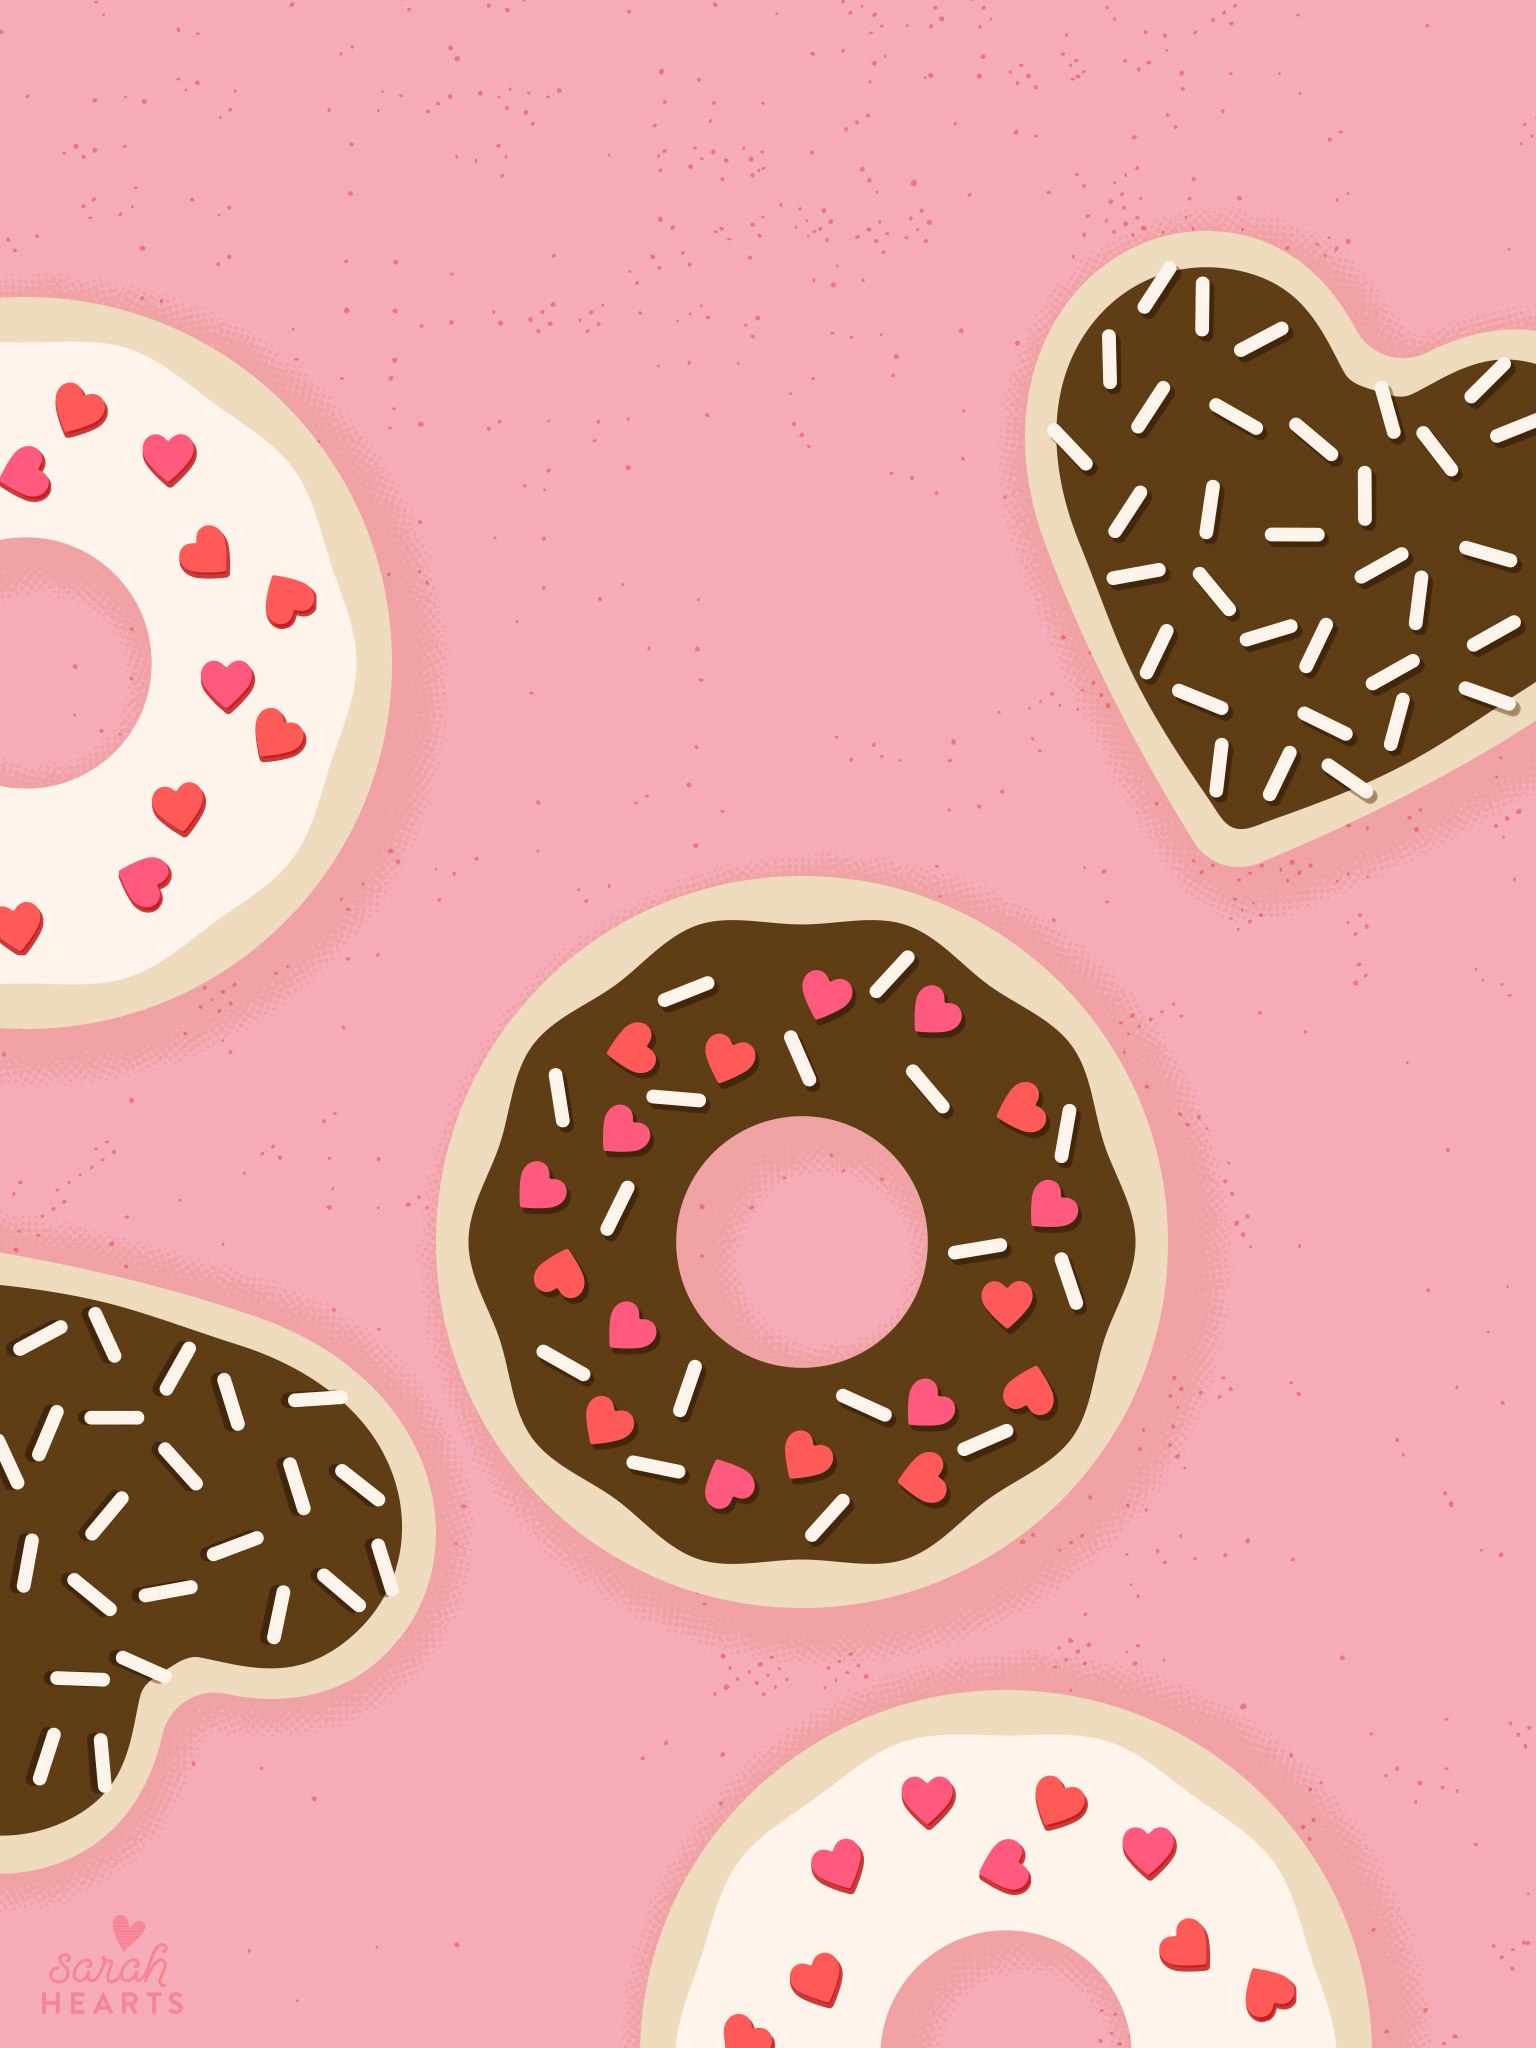 Donut Wallpapers